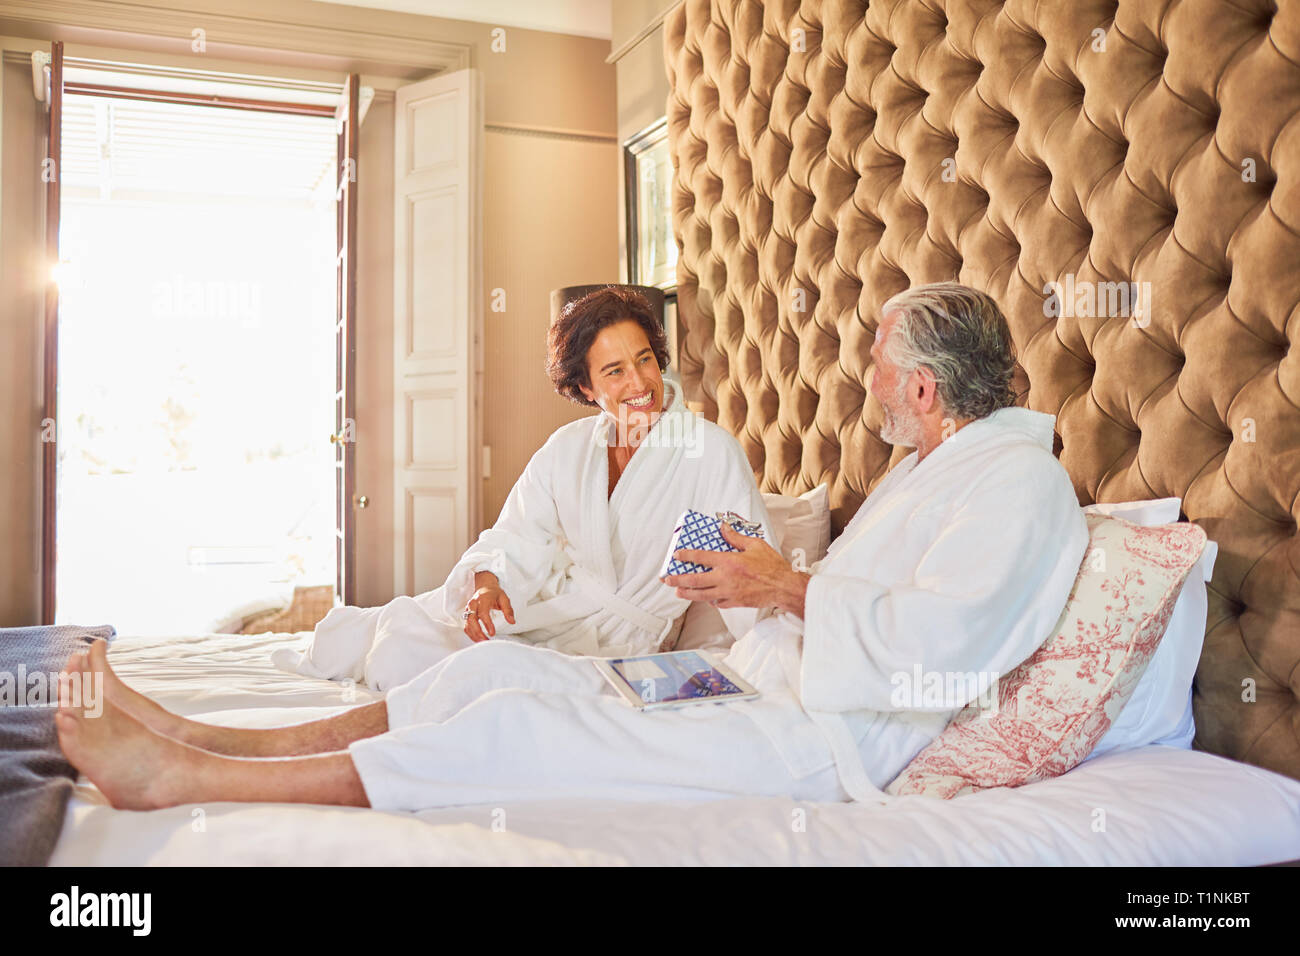 Mature couple in bathrobes on hotel bed Stock Photo